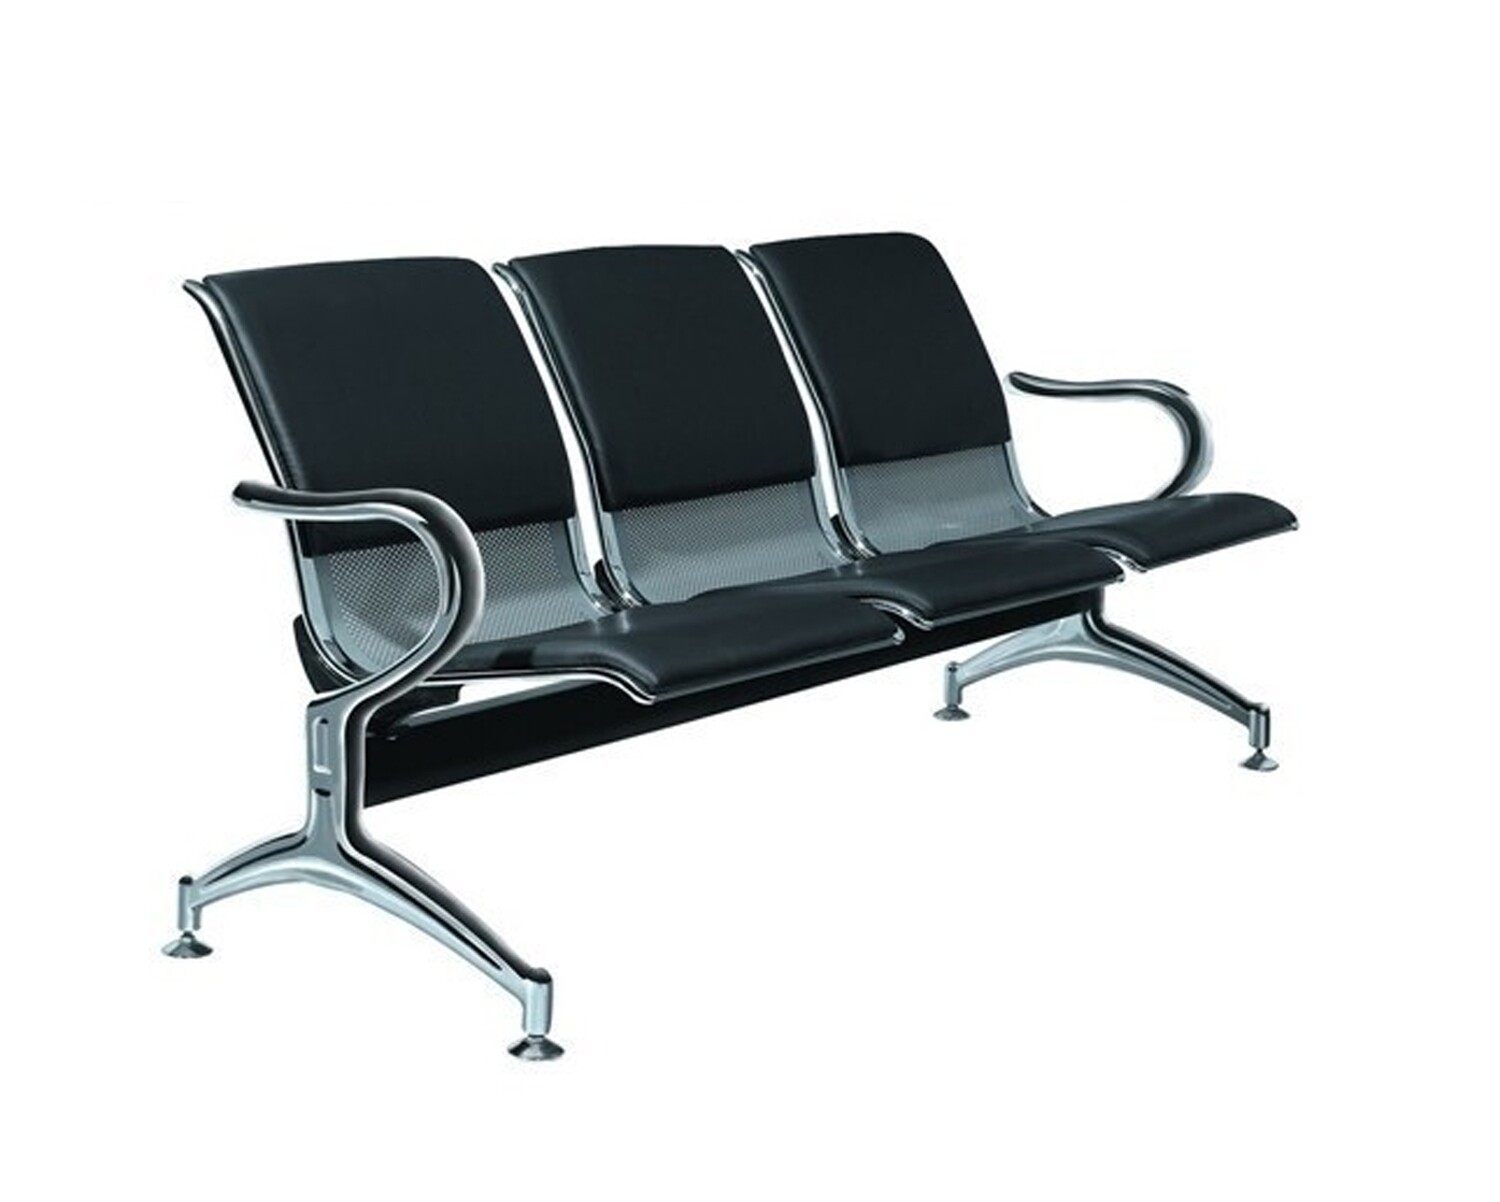 OFIX 3-Seater / 4-Seater PU Airport Gang Chair (Black)